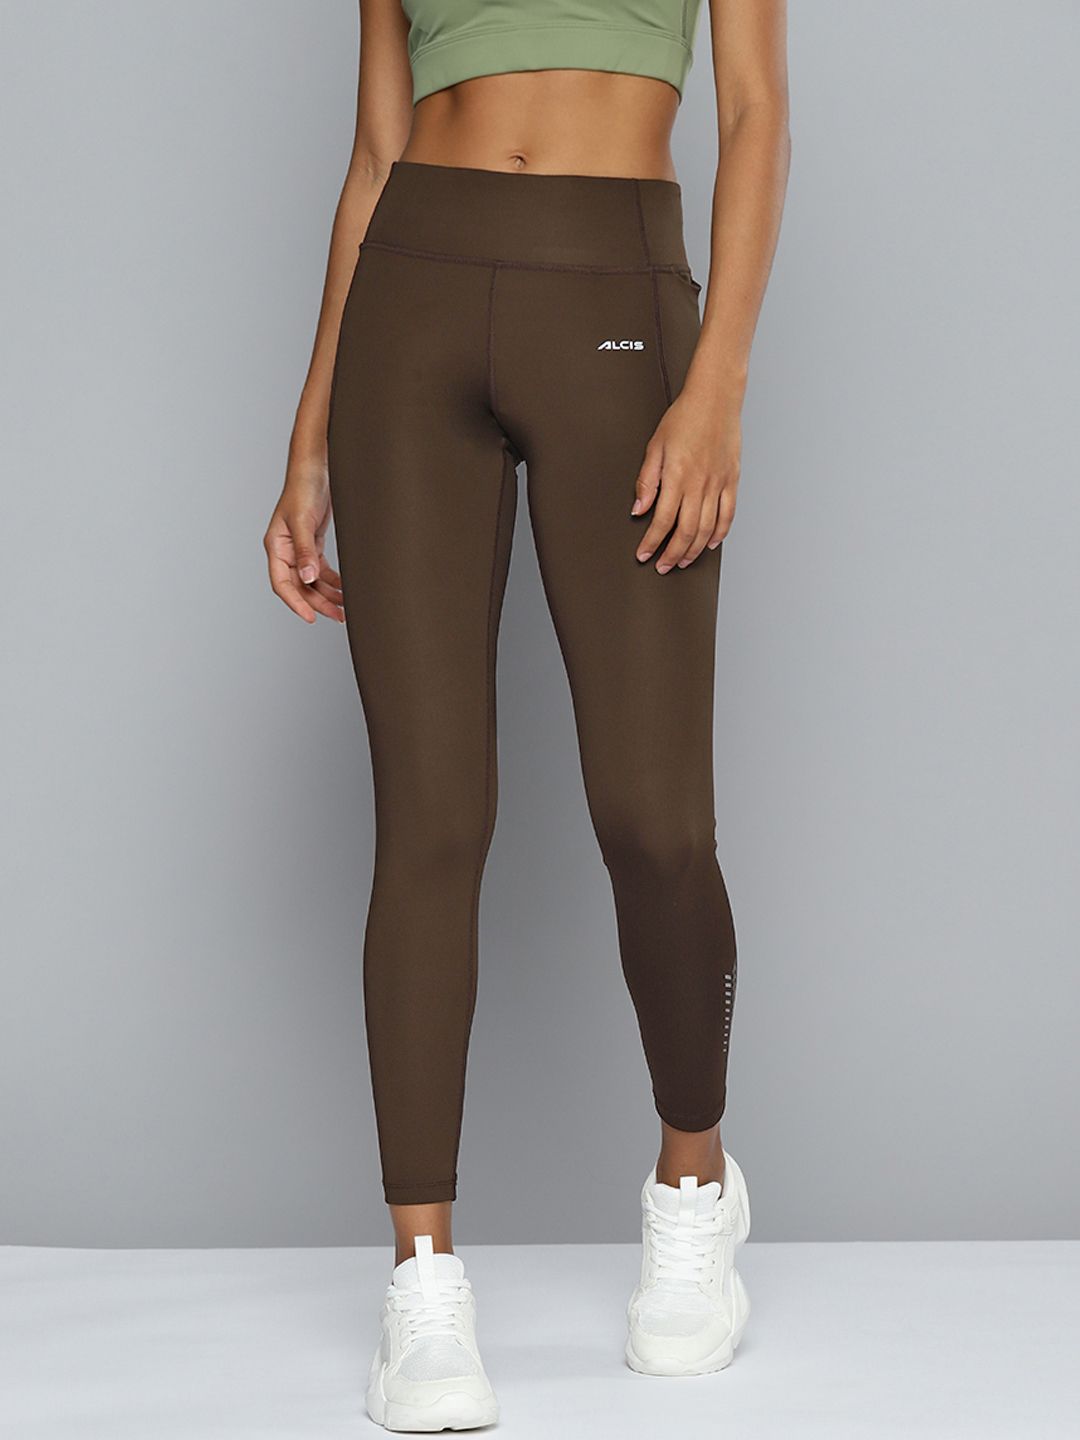 Alcis Women Coffee Brown Solid Tights Price in India